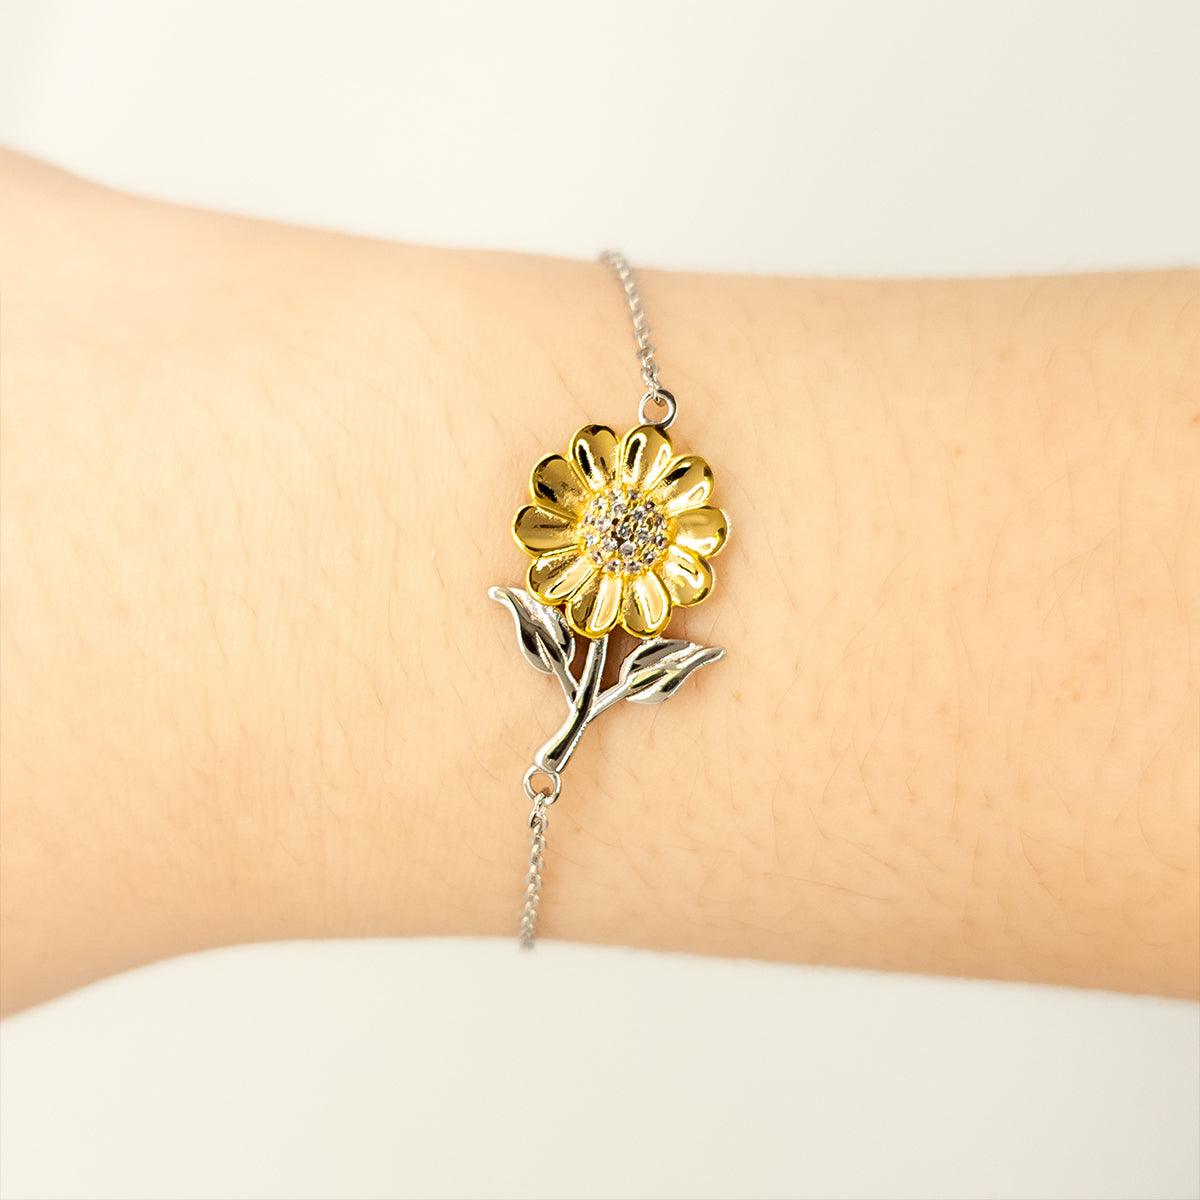 Remarkable Anesthesiologist Gifts, Your dedication and hard work, Inspirational Birthday Christmas Unique Sunflower Bracelet For Anesthesiologist, Coworkers, Men, Women, Friends - Mallard Moon Gift Shop